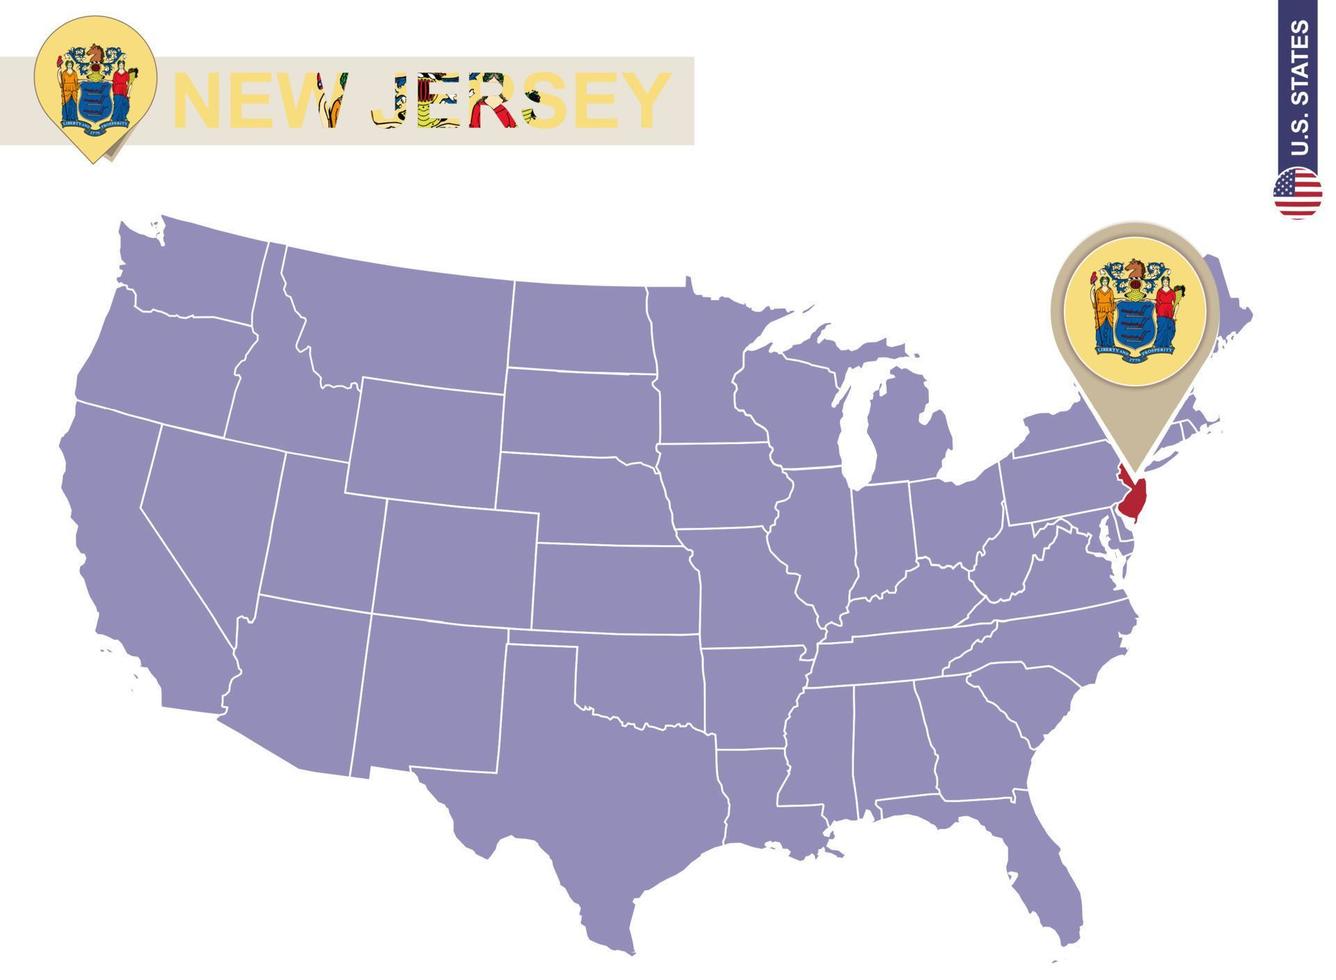 New Jersey State on USA Map. New Jersey flag and map. vector